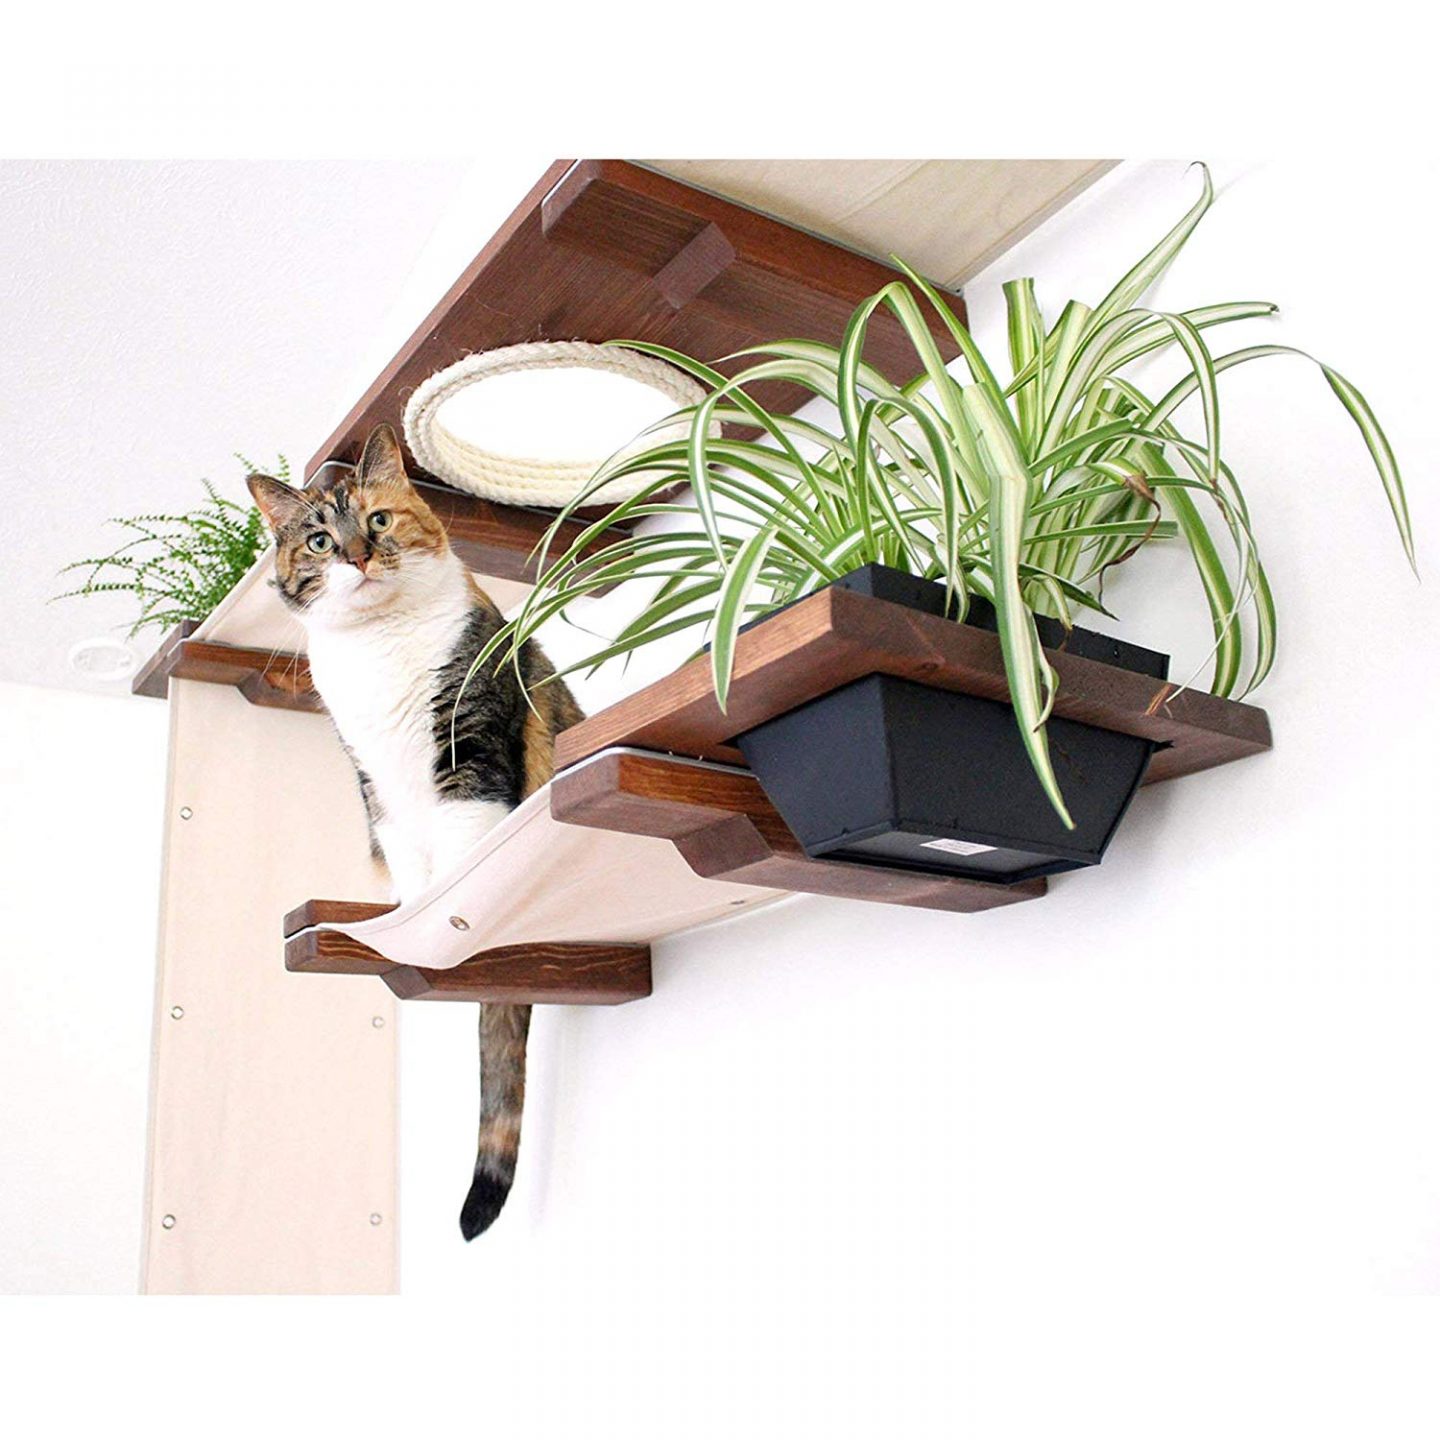 Nontoxic plants and edible plants for cats, like catnip and cat grass are great to place in your garden cat shelf kit.